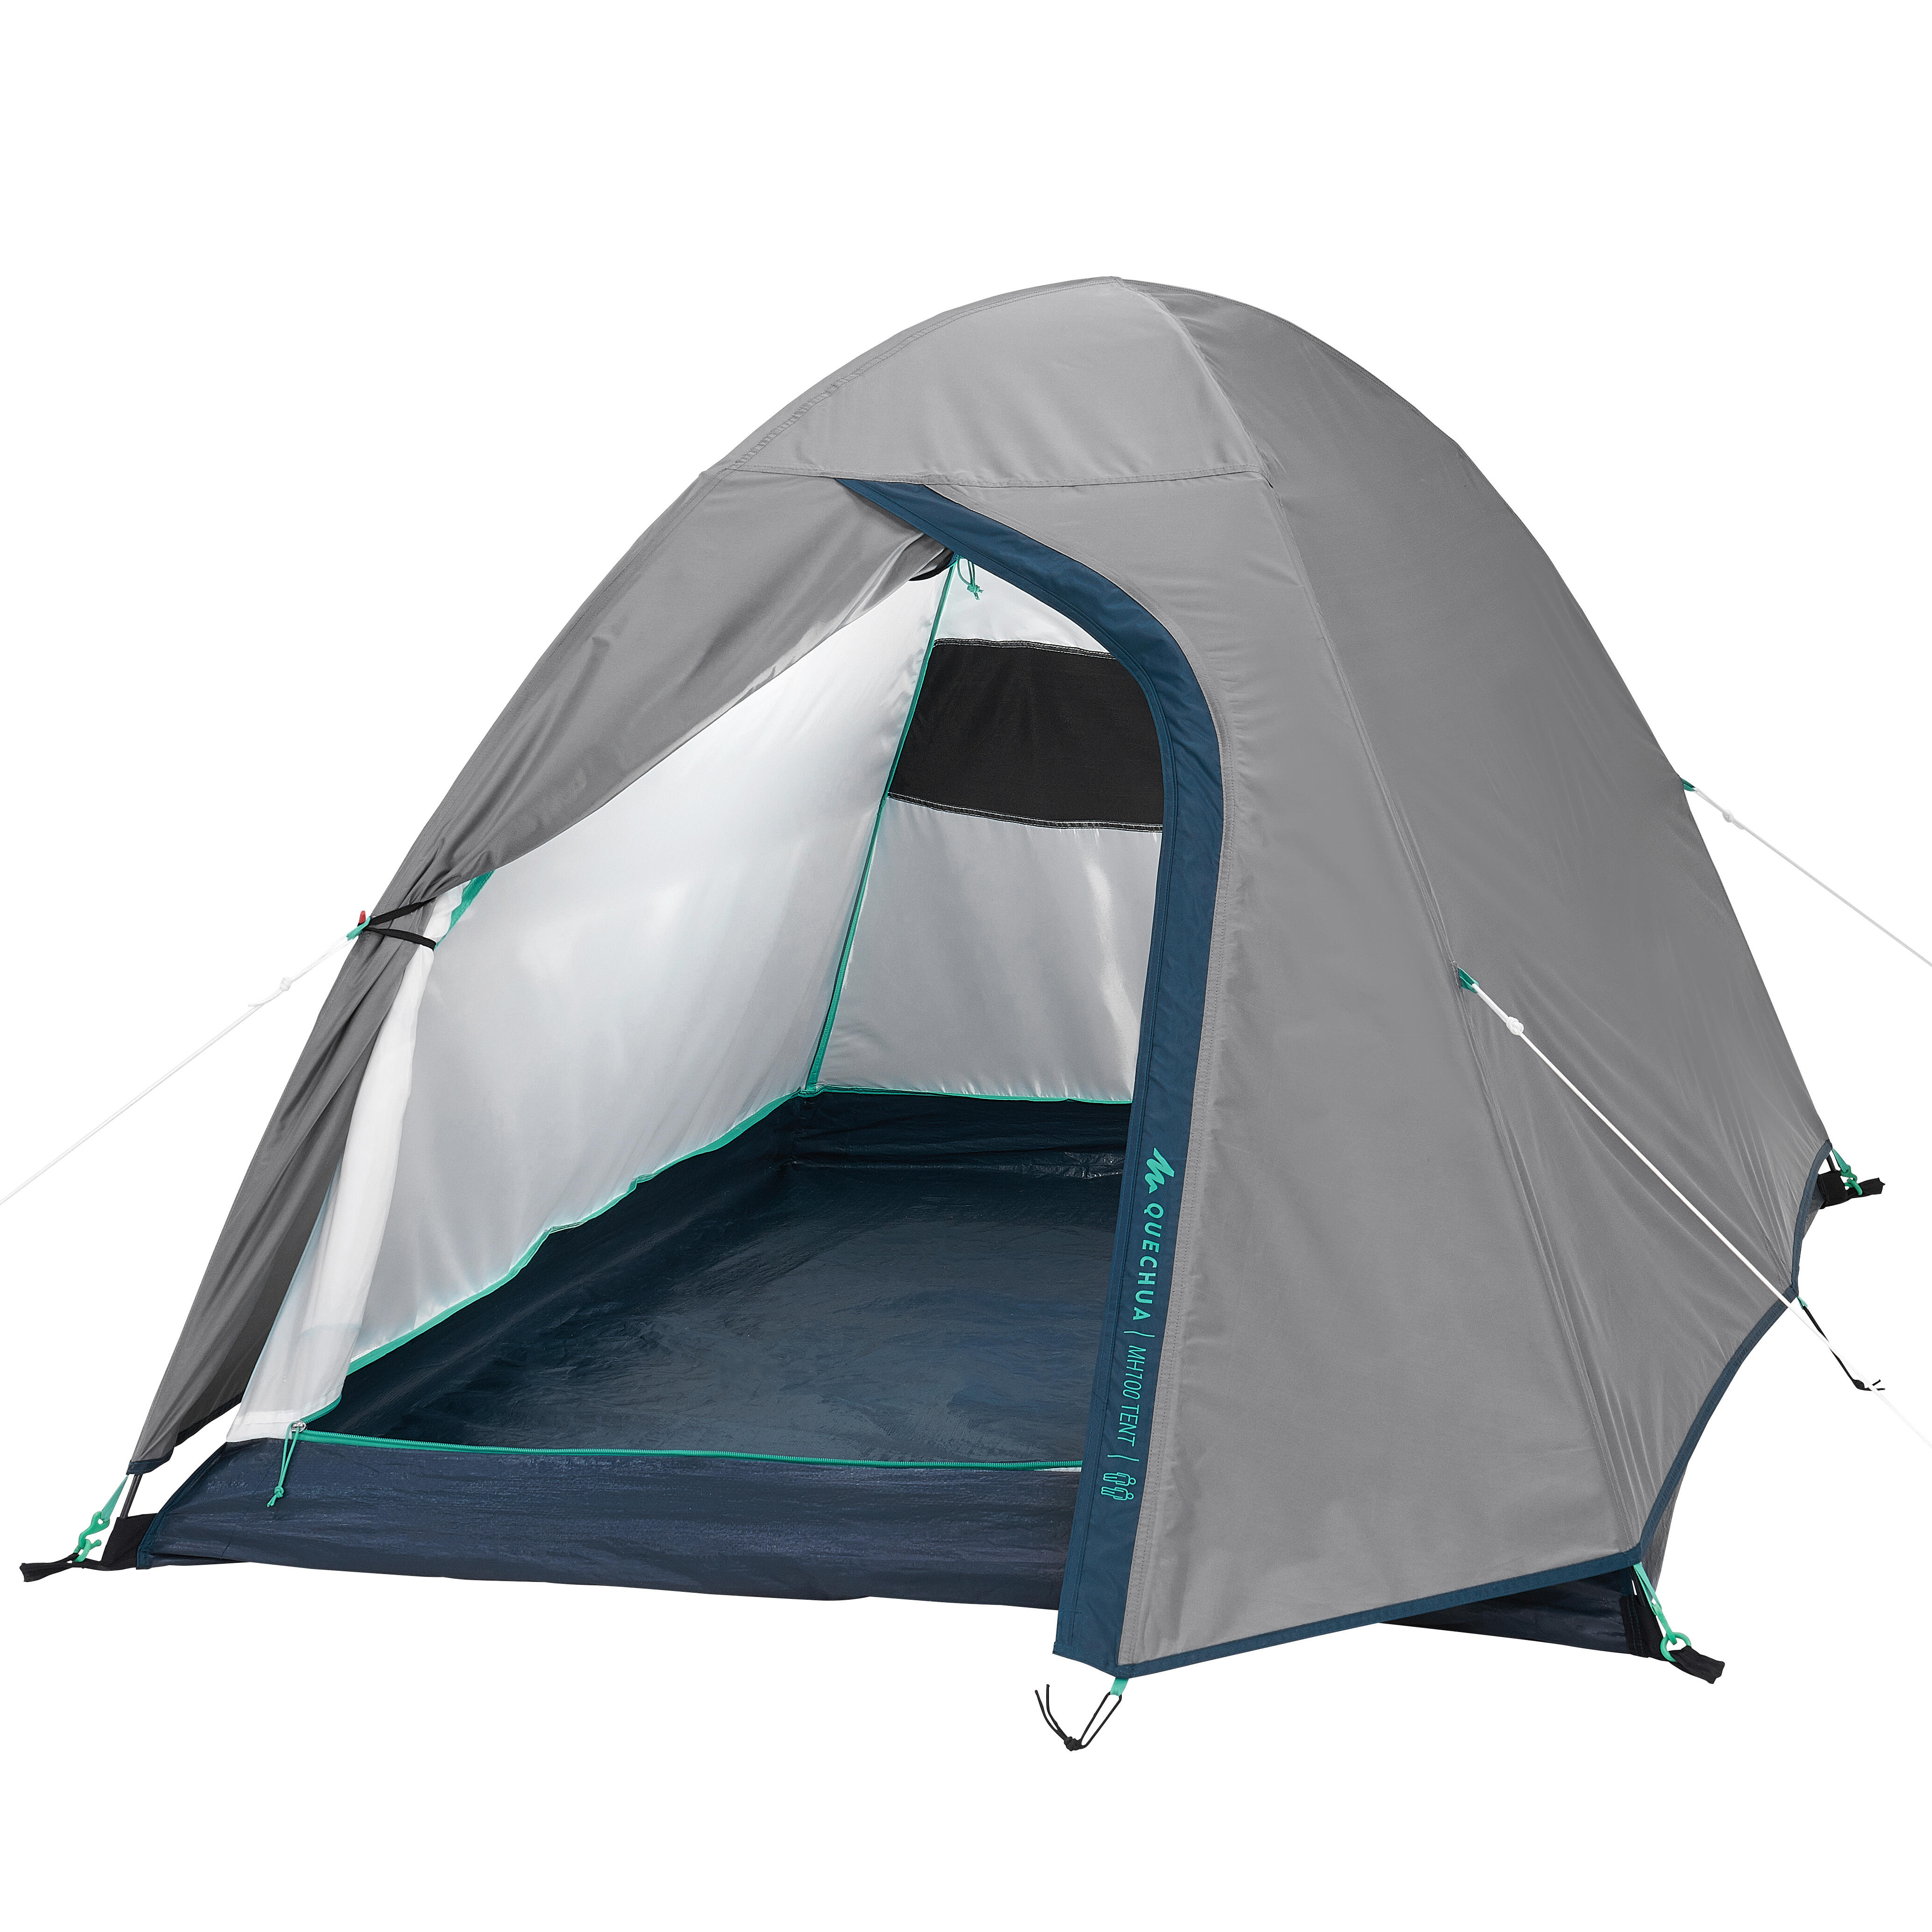 Buy Camping Tents Online at Decathlon India